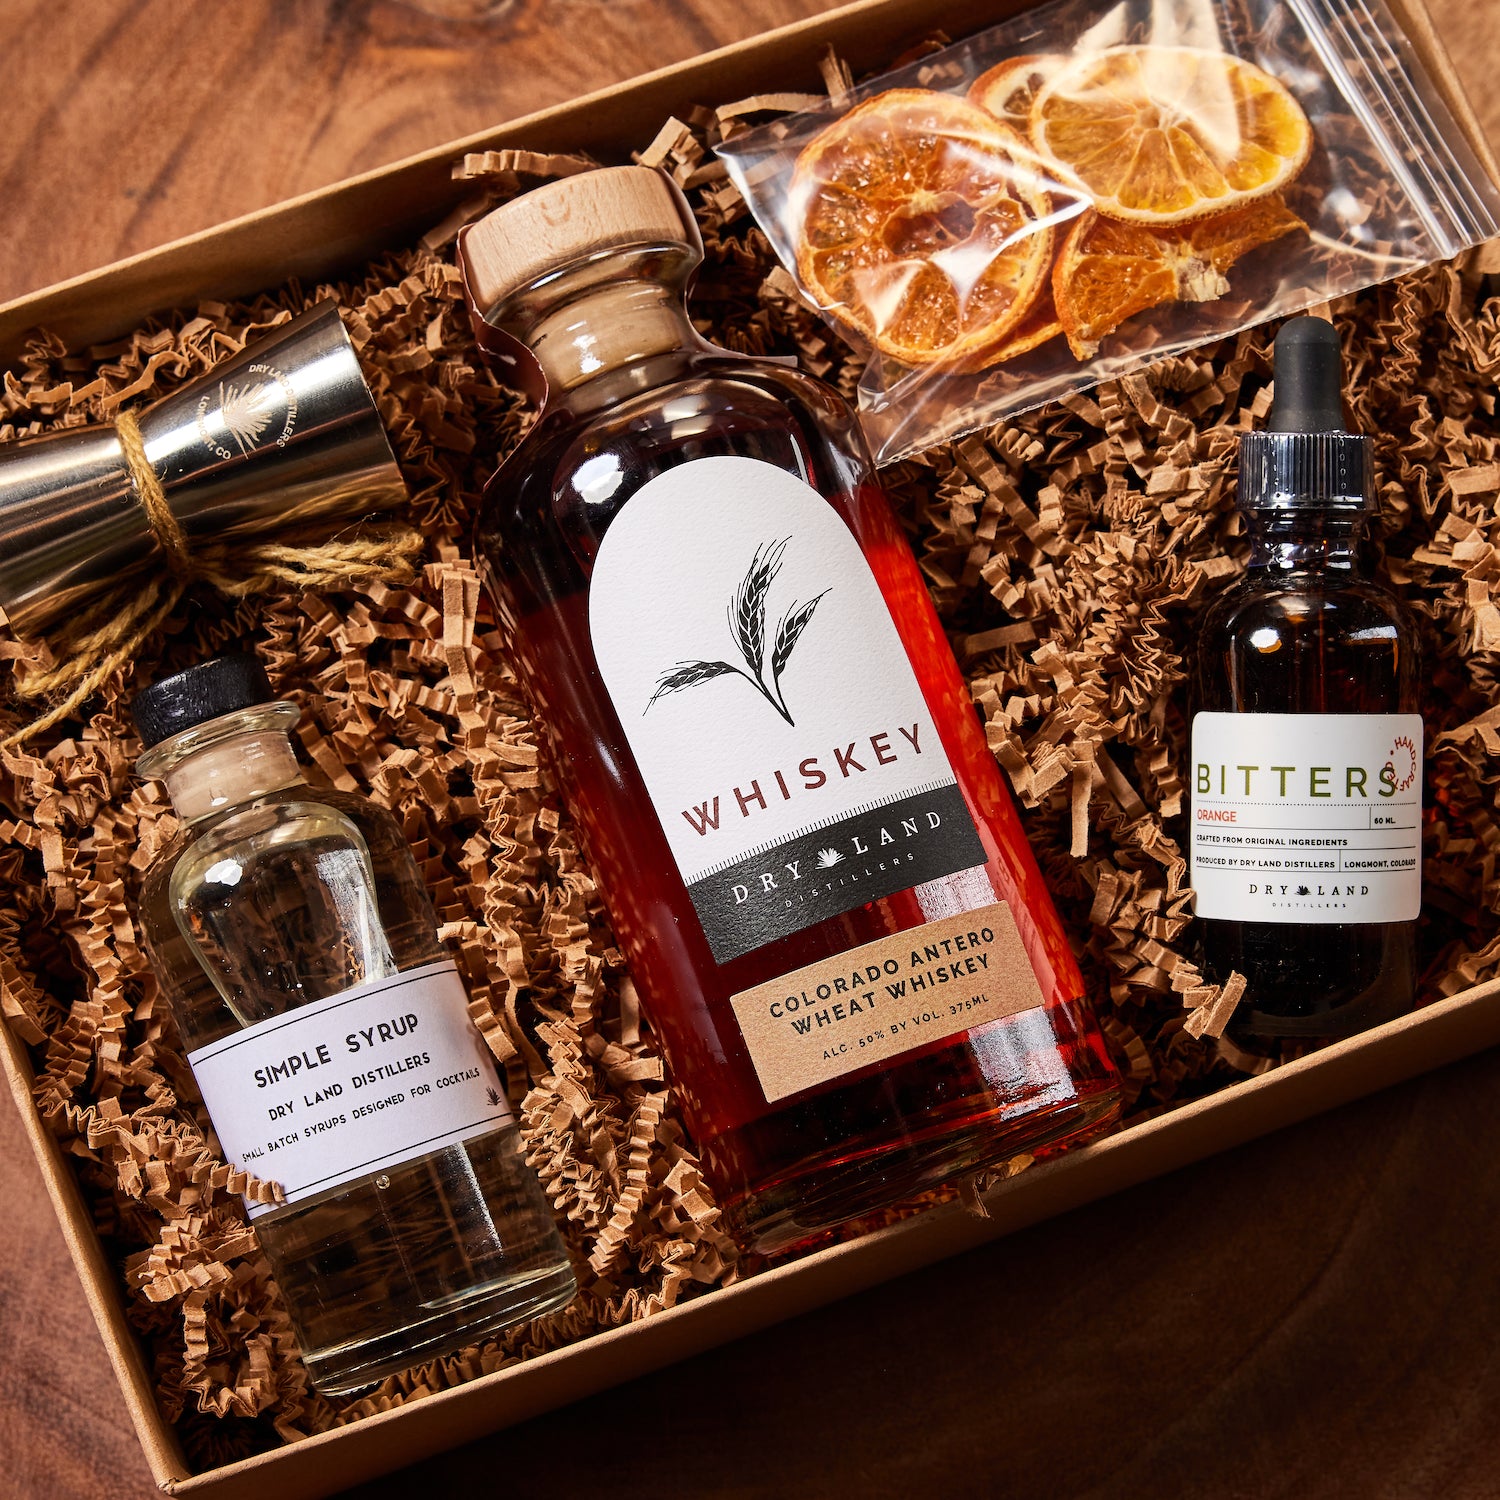 Dry Land Old Fashioned Cocktail Kit – Dry Land Distillers